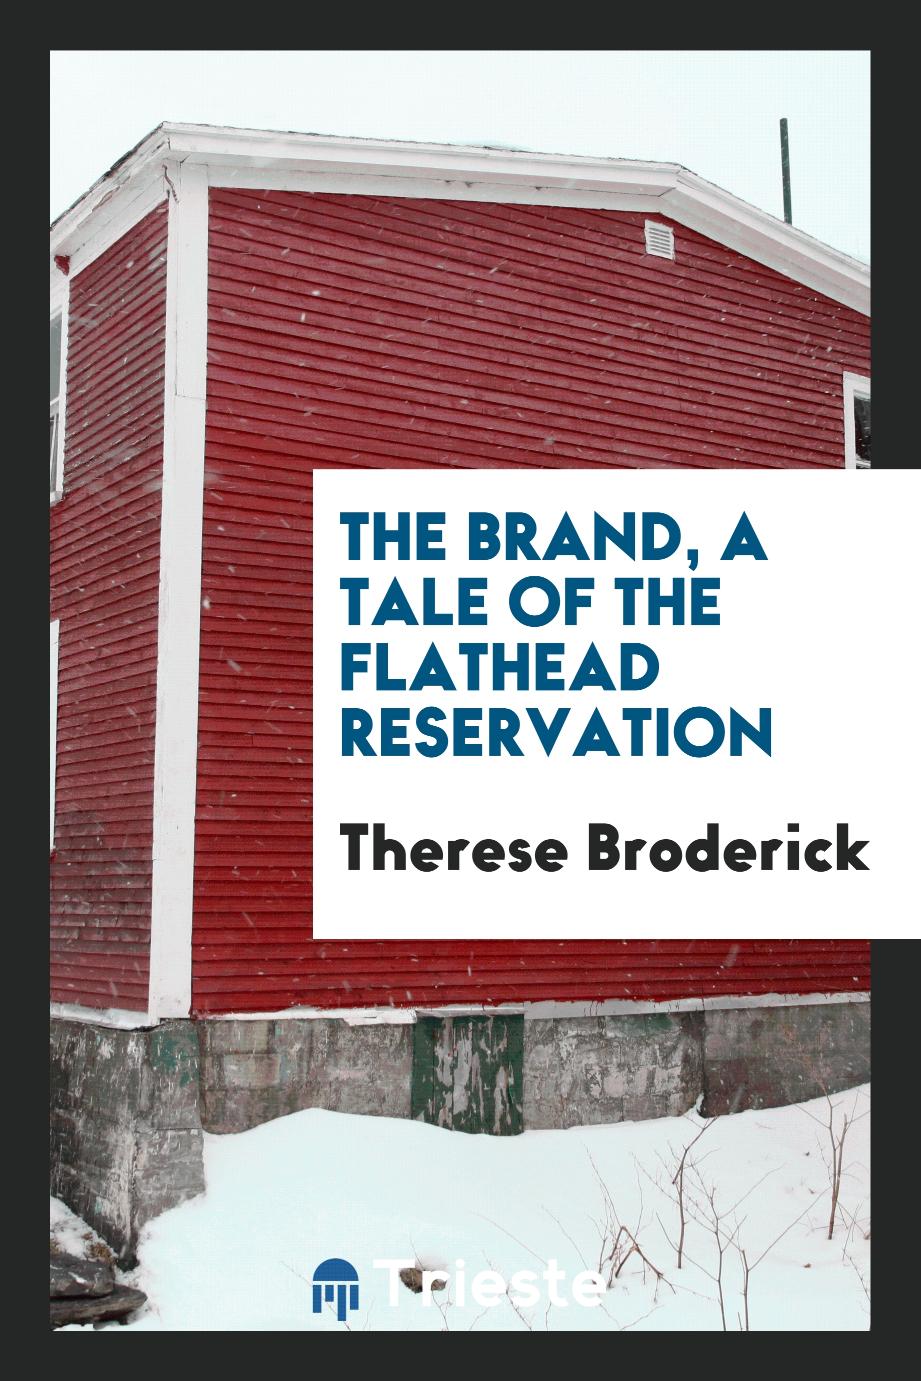 The brand, a tale of the Flathead reservation